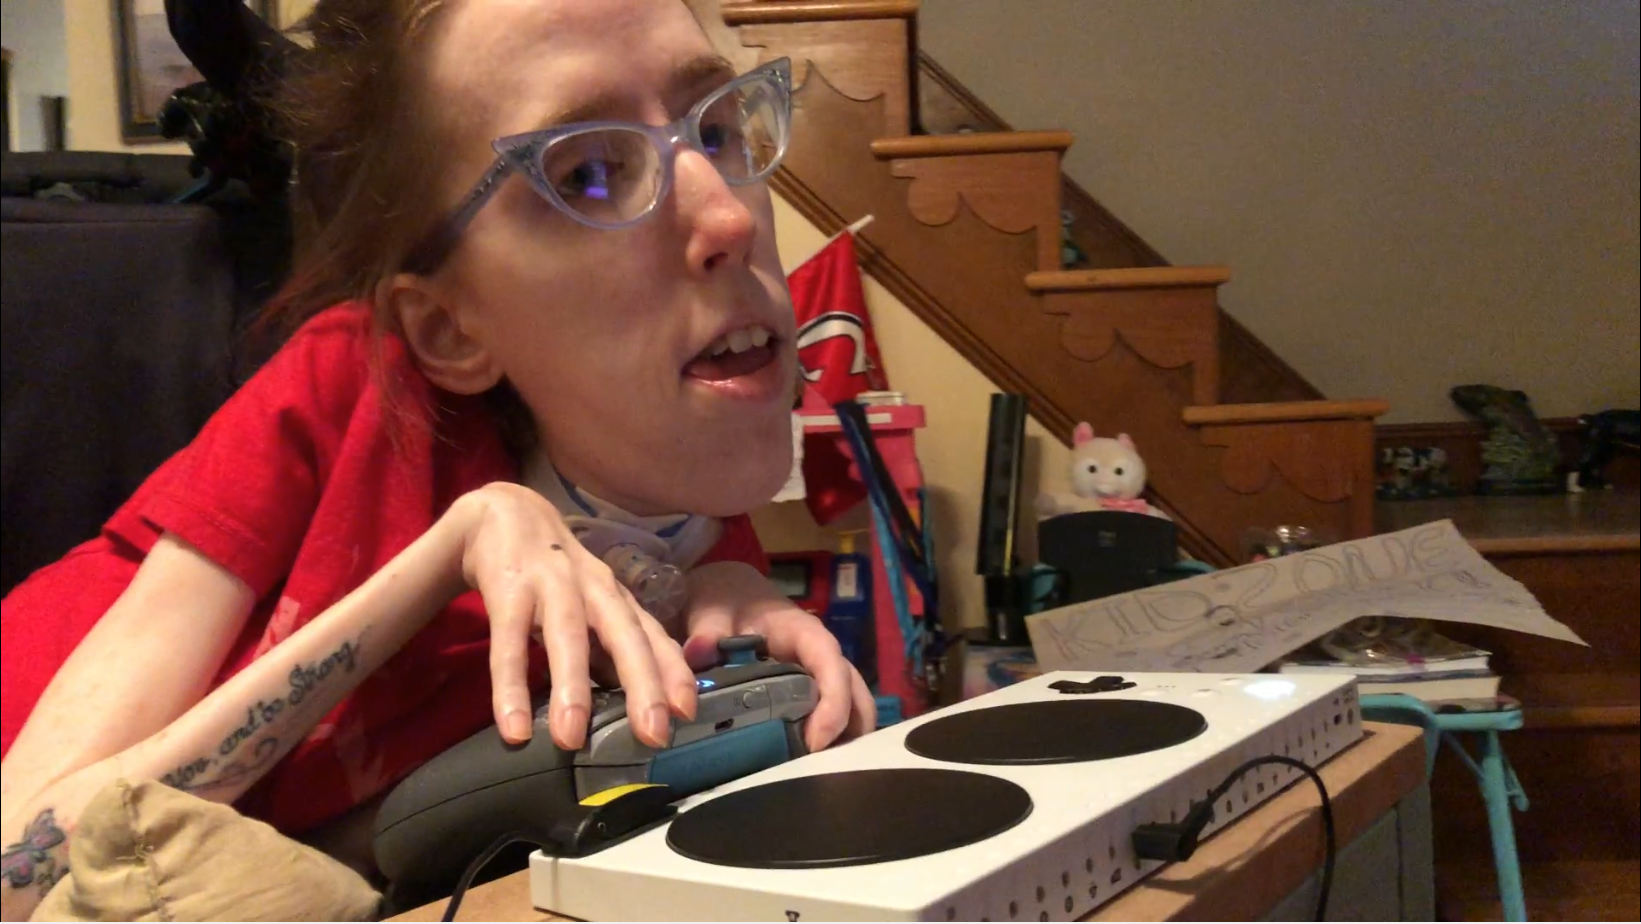 Erin, a visibility disabled woman, uses an xbox adaptive controller